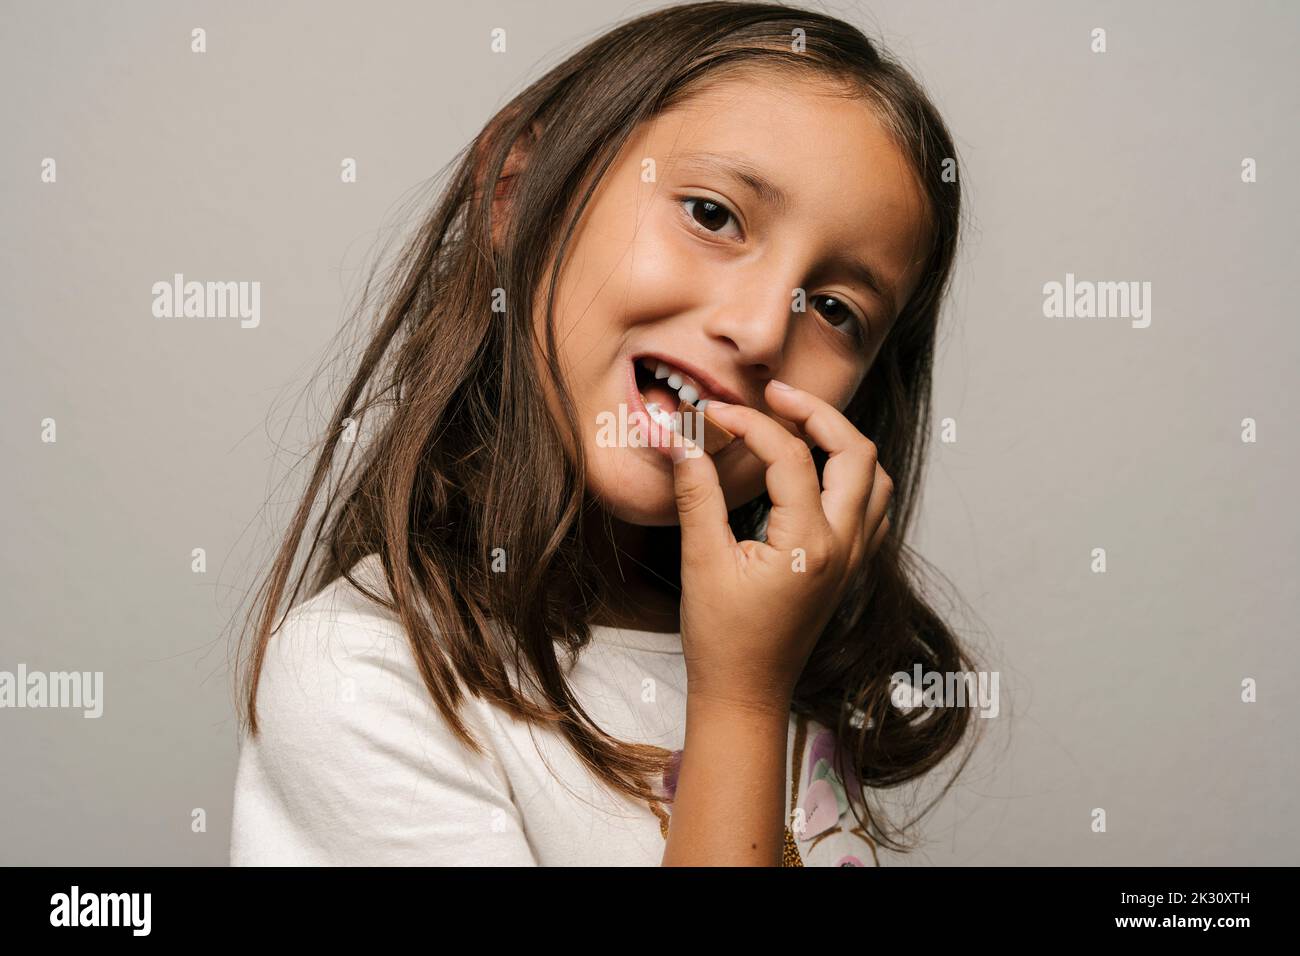 Cute girl eating chocolate against gray background Stock Photo